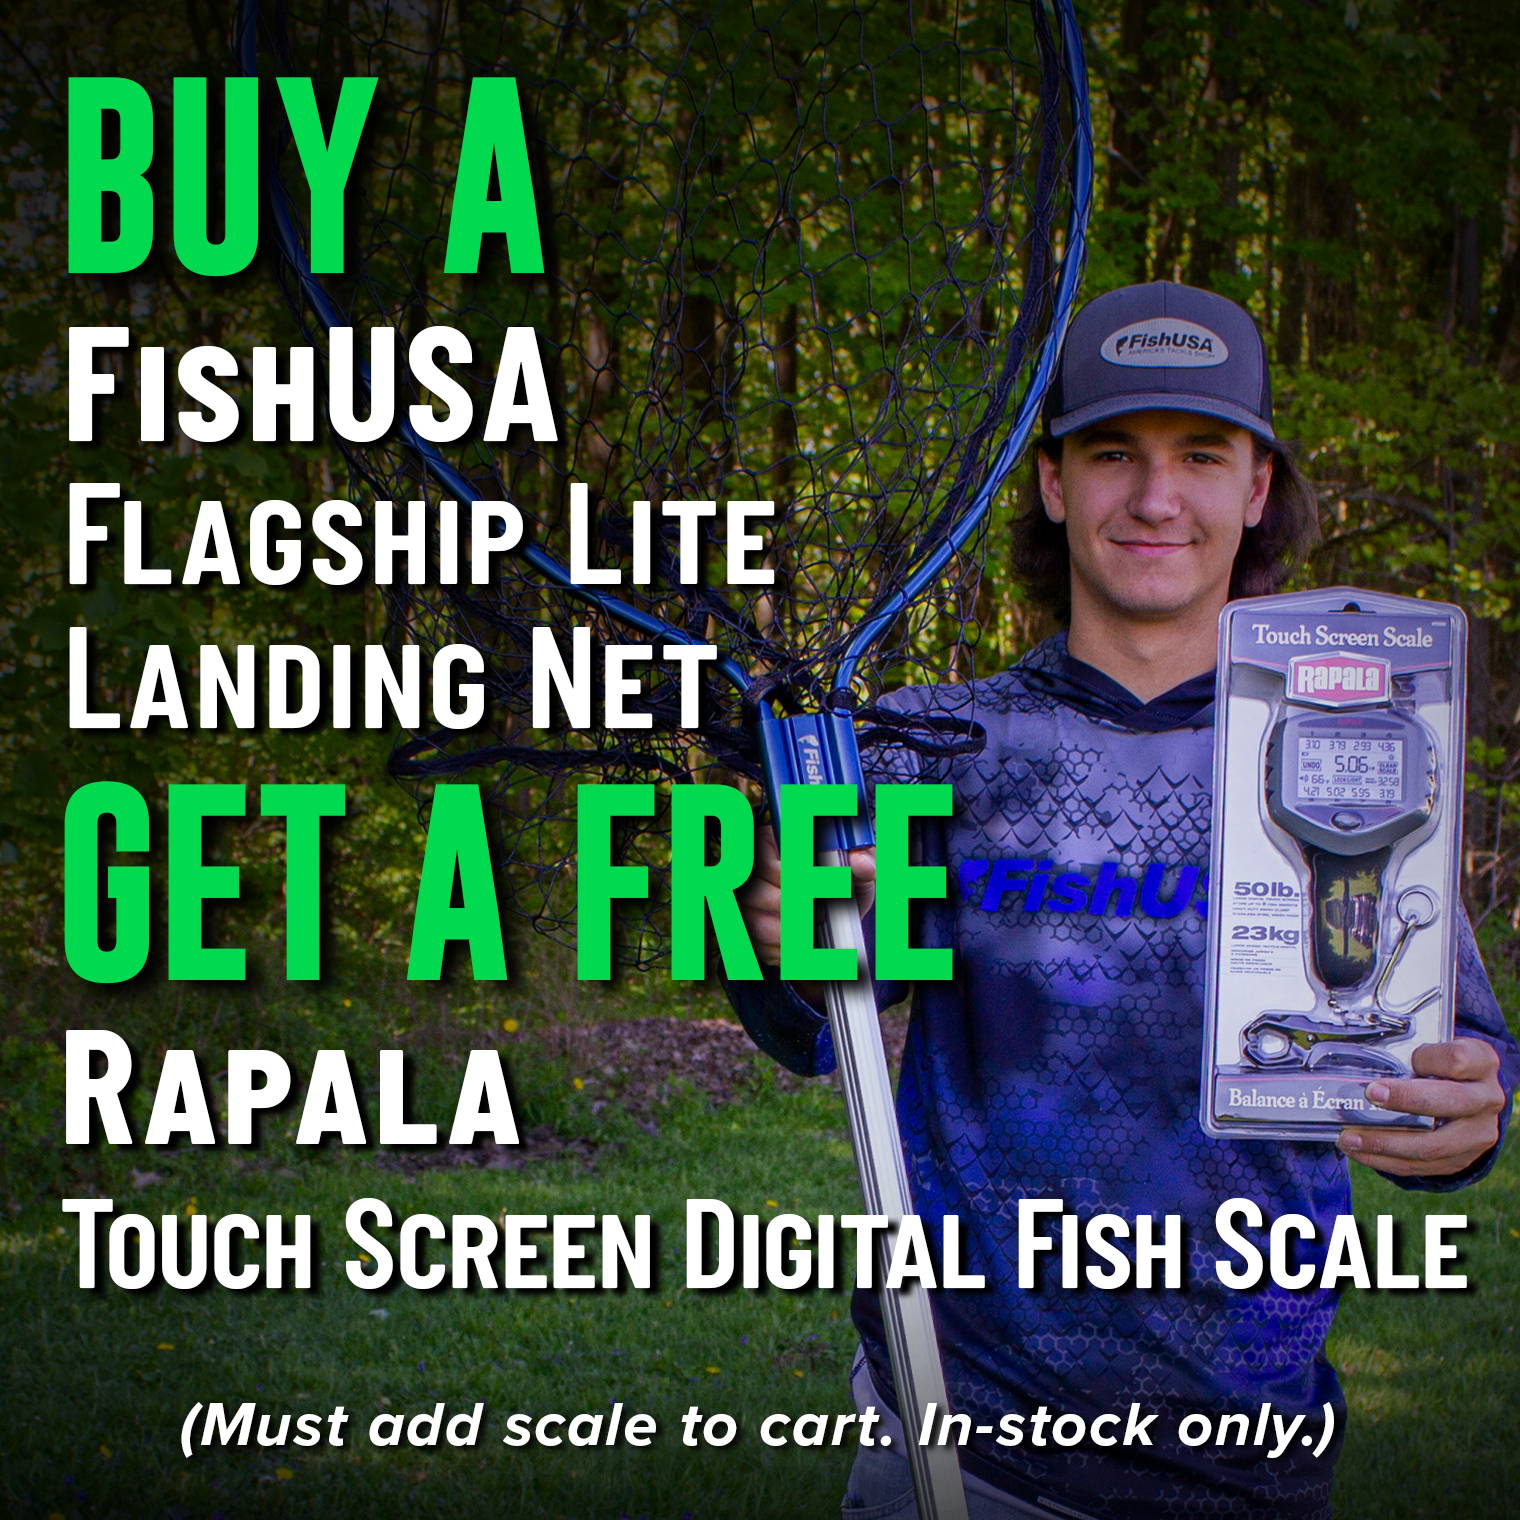 Buy a FishUSA Flagship Lite Landing Net Get a Free Rapala Touch Screen Digital Fish Scale (Must add scale to cart. In-stock only.)